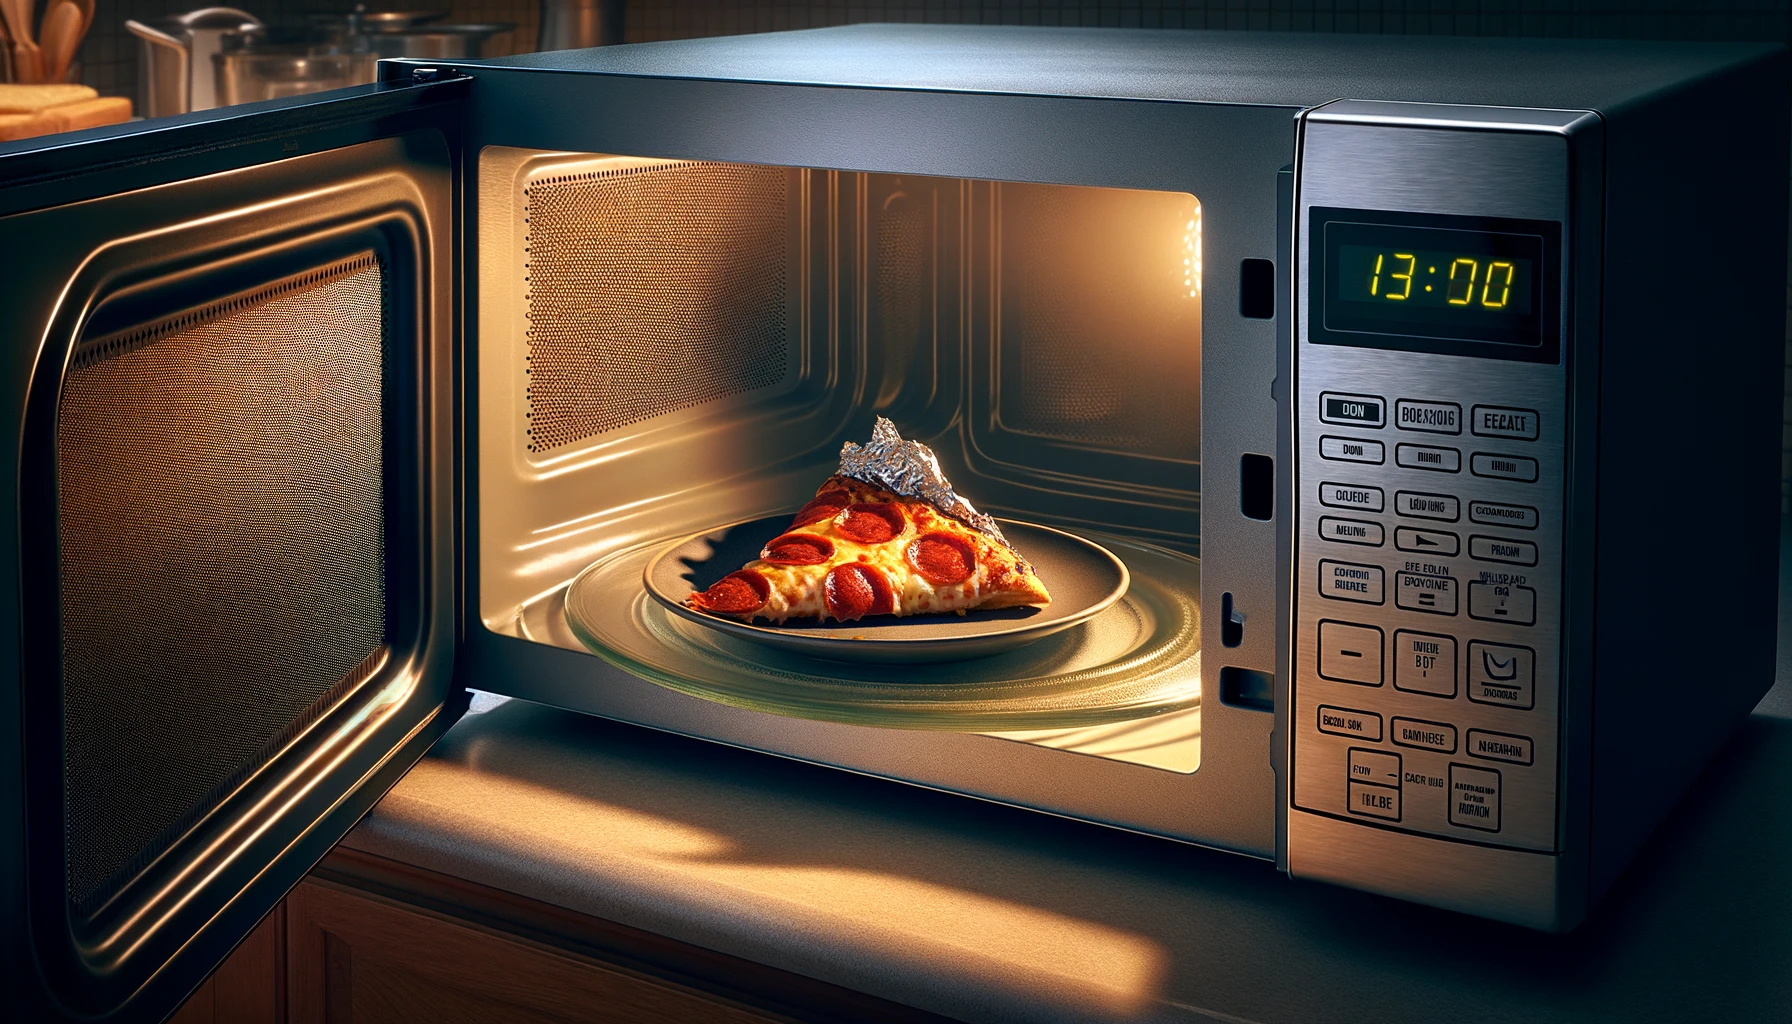 My microwave is sparking because pizza crust contains foil